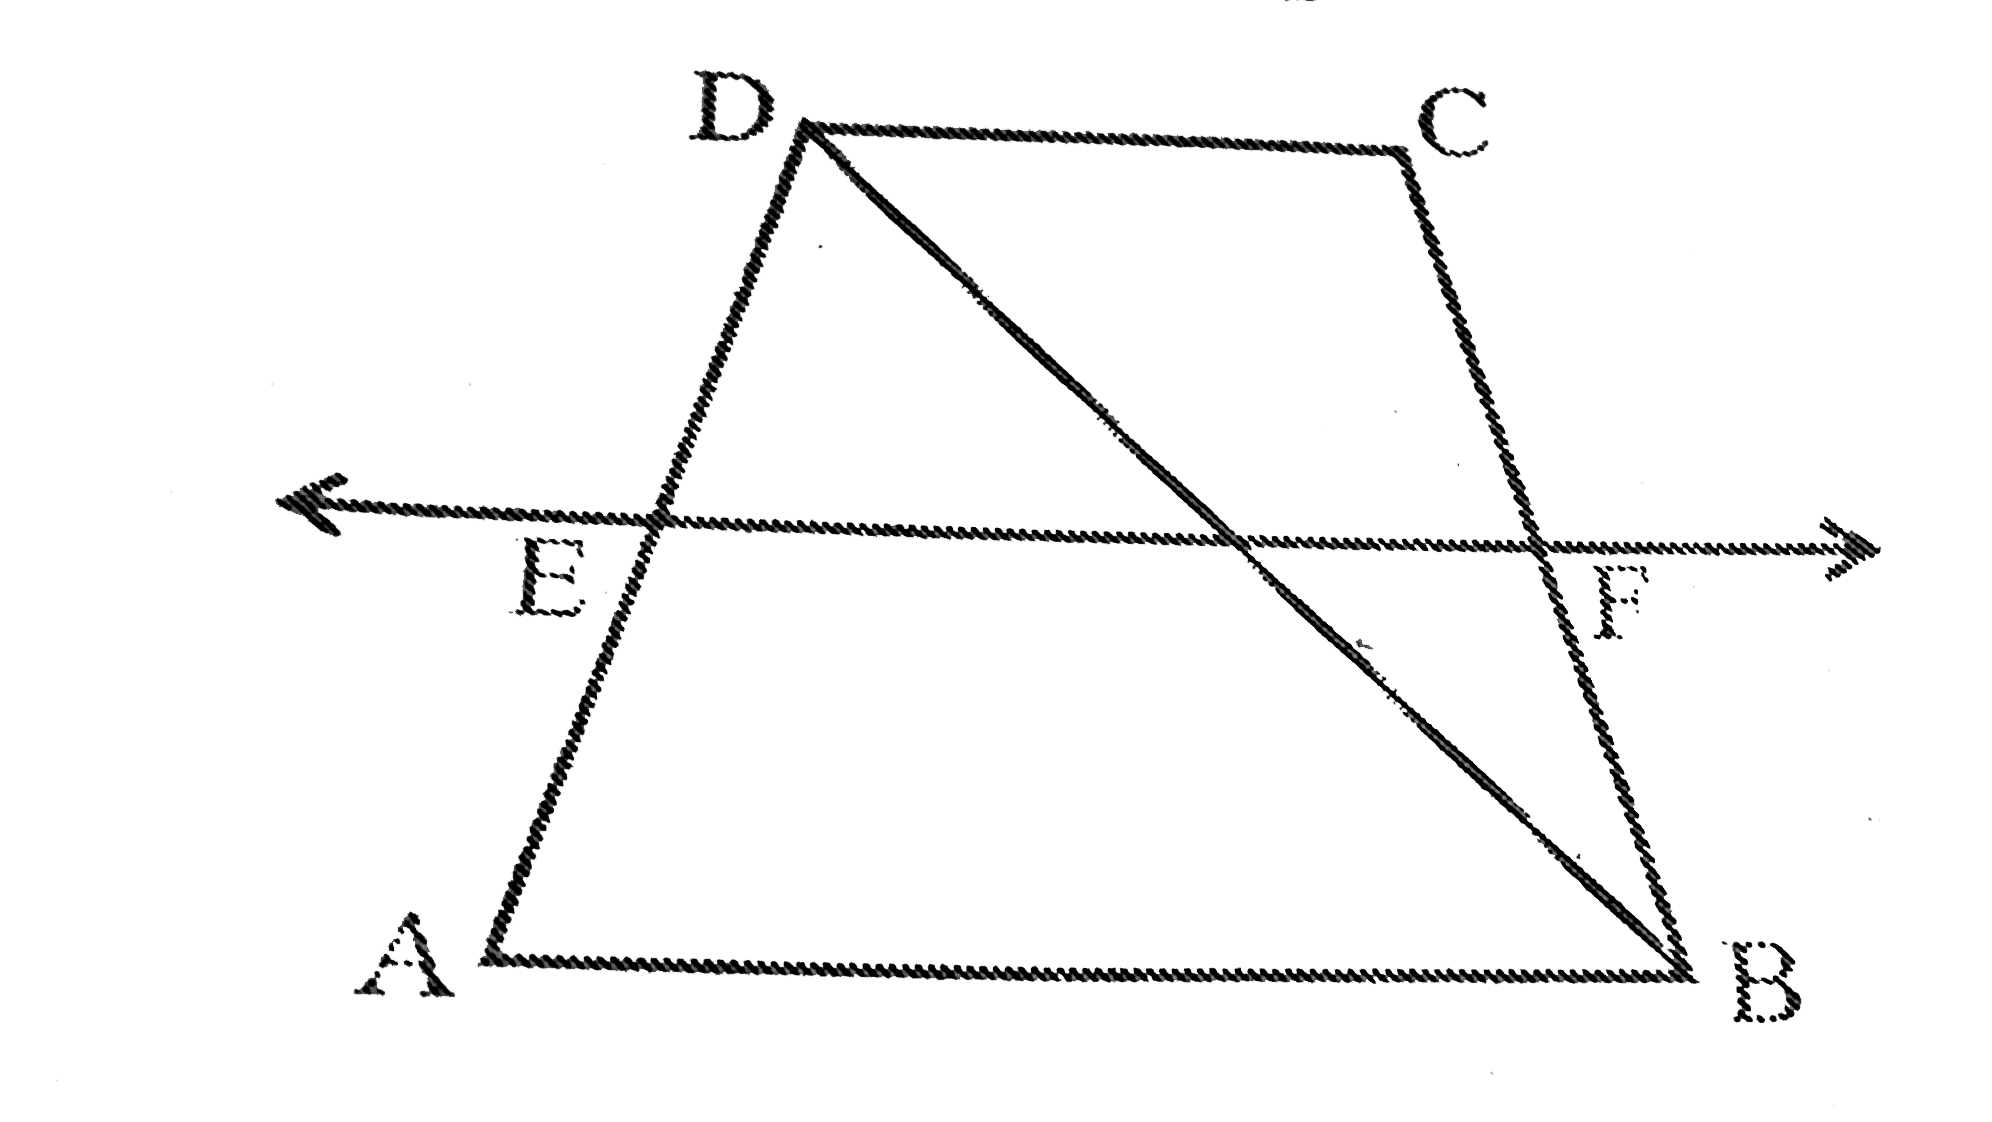 ABCD is a  trapezium in which A B\ ||\ D C, BD is a diagonal and E is the mid-point of  AD. A line is drawn through E parallel to AB intersecting BC at F (see Fig.  8.30). Show that F is the mid-point of  BC.